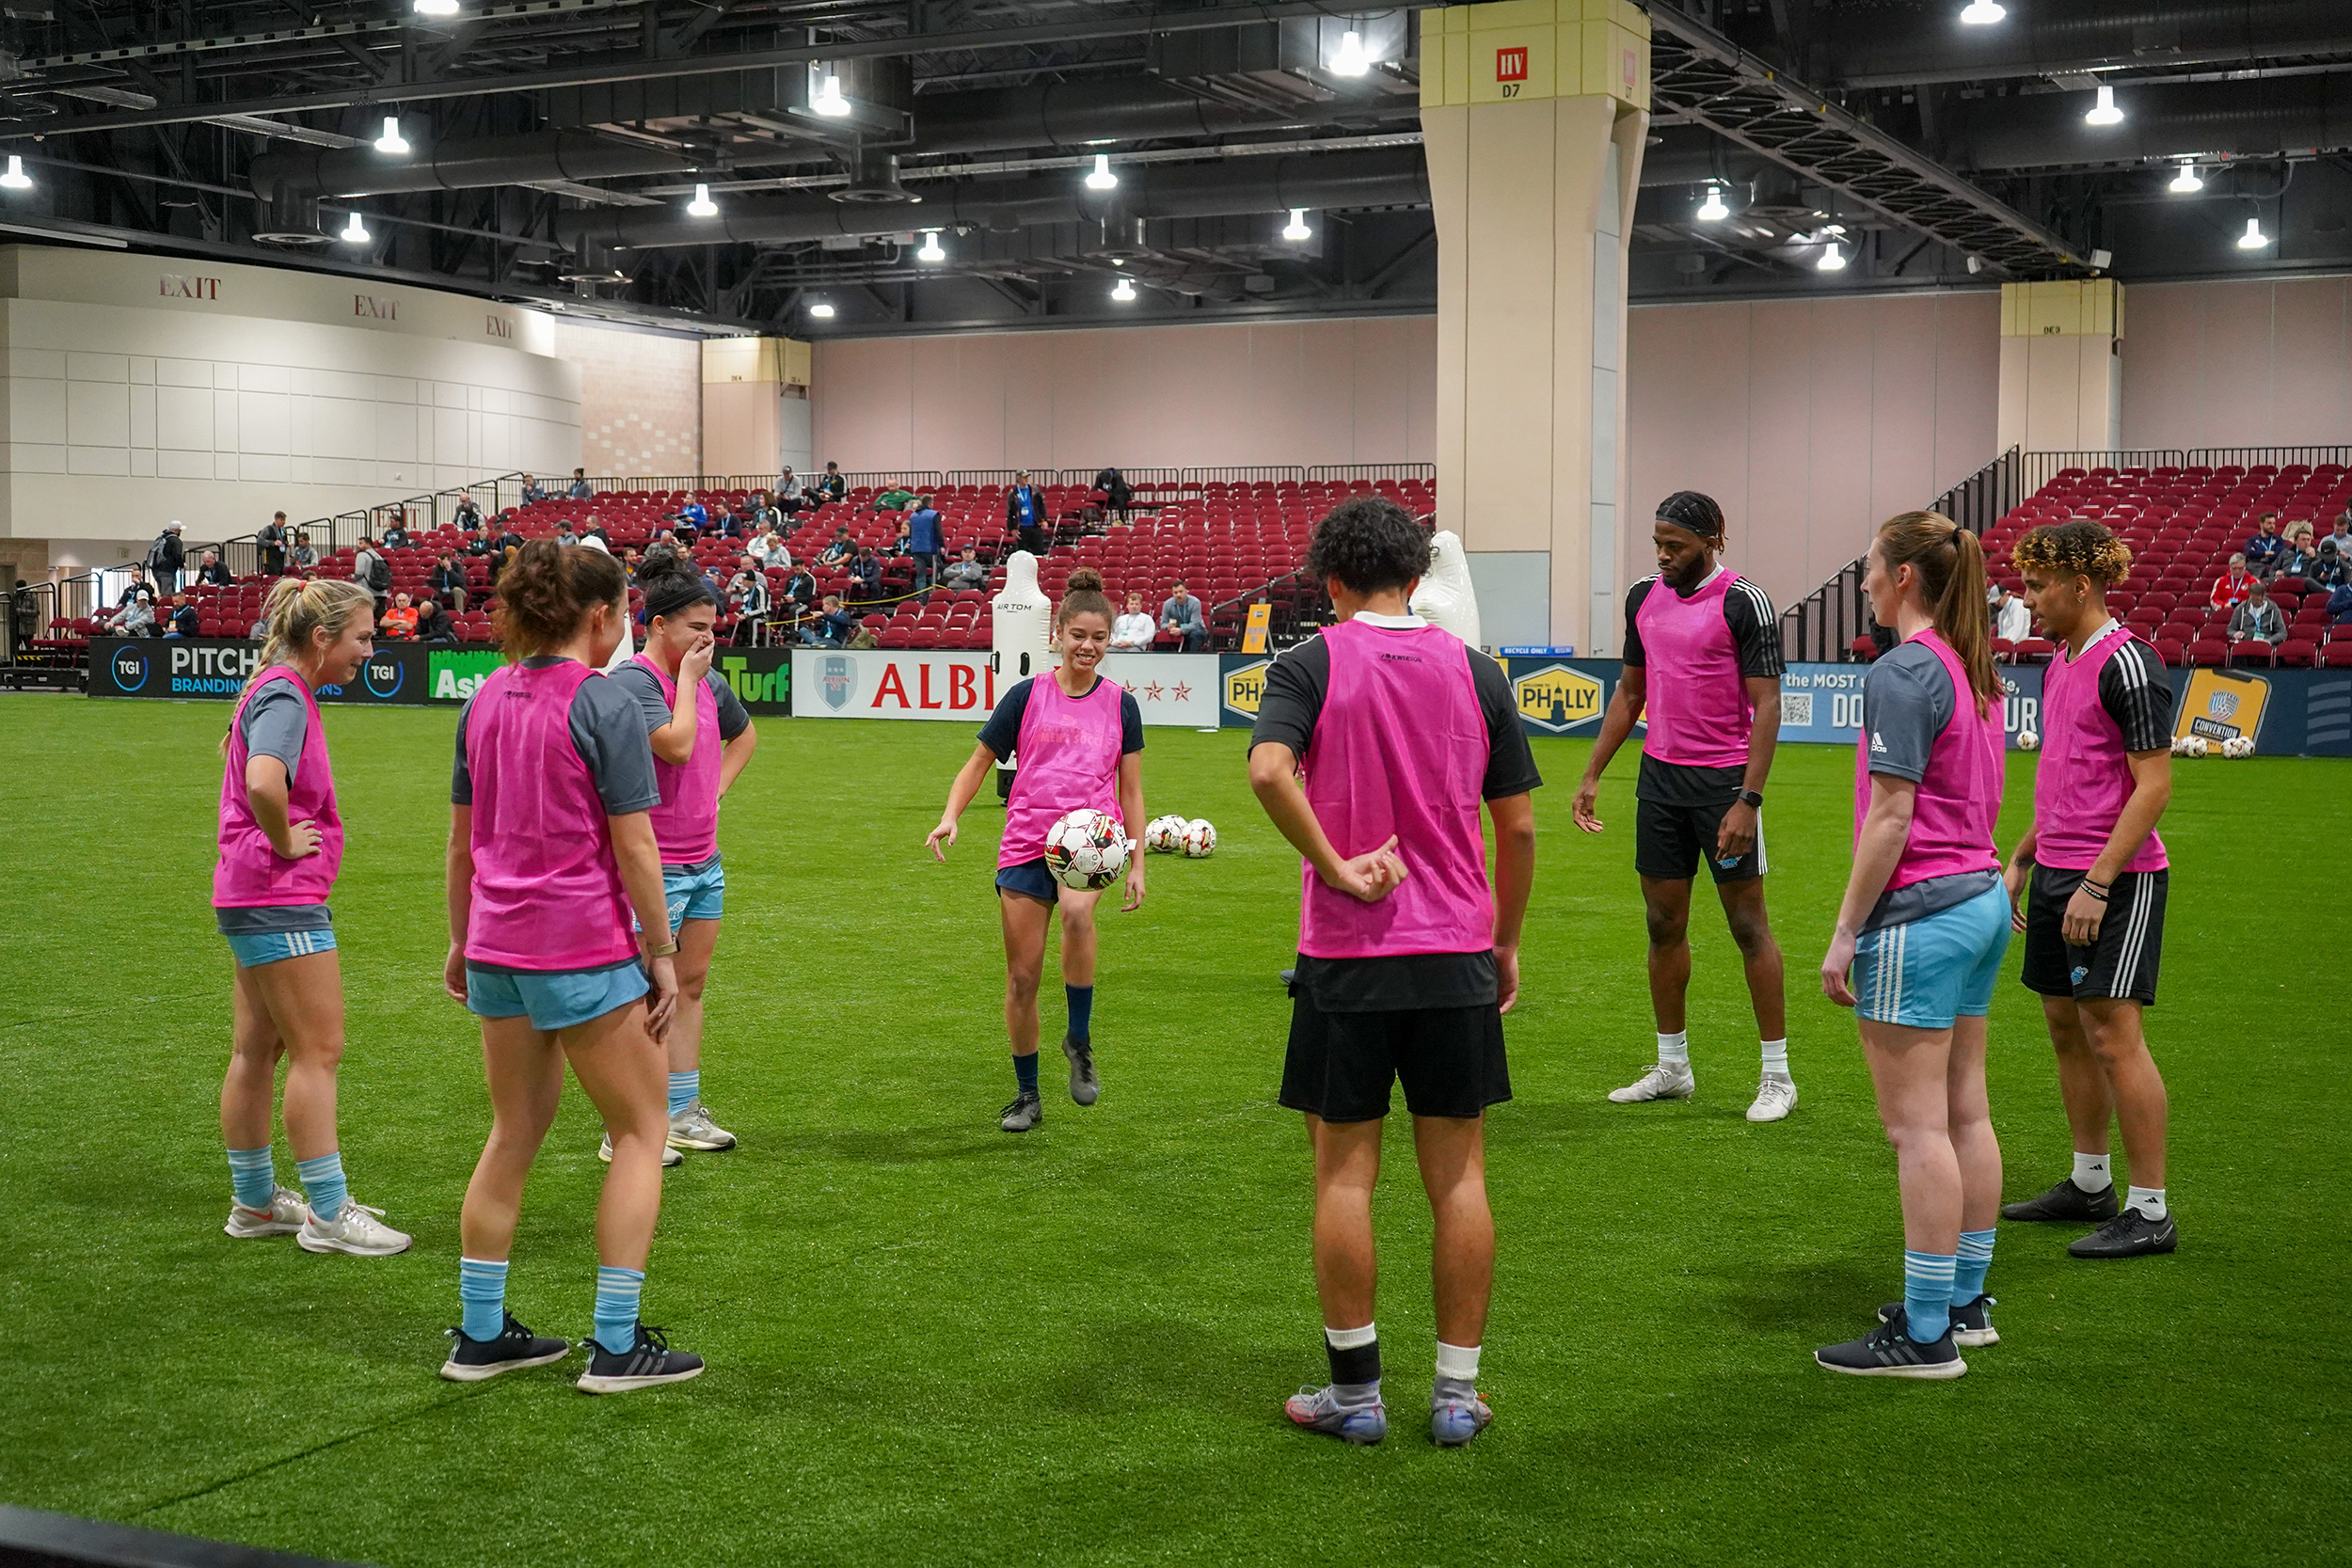 A group of teenagers kick around a soccer ball on an indoor field.